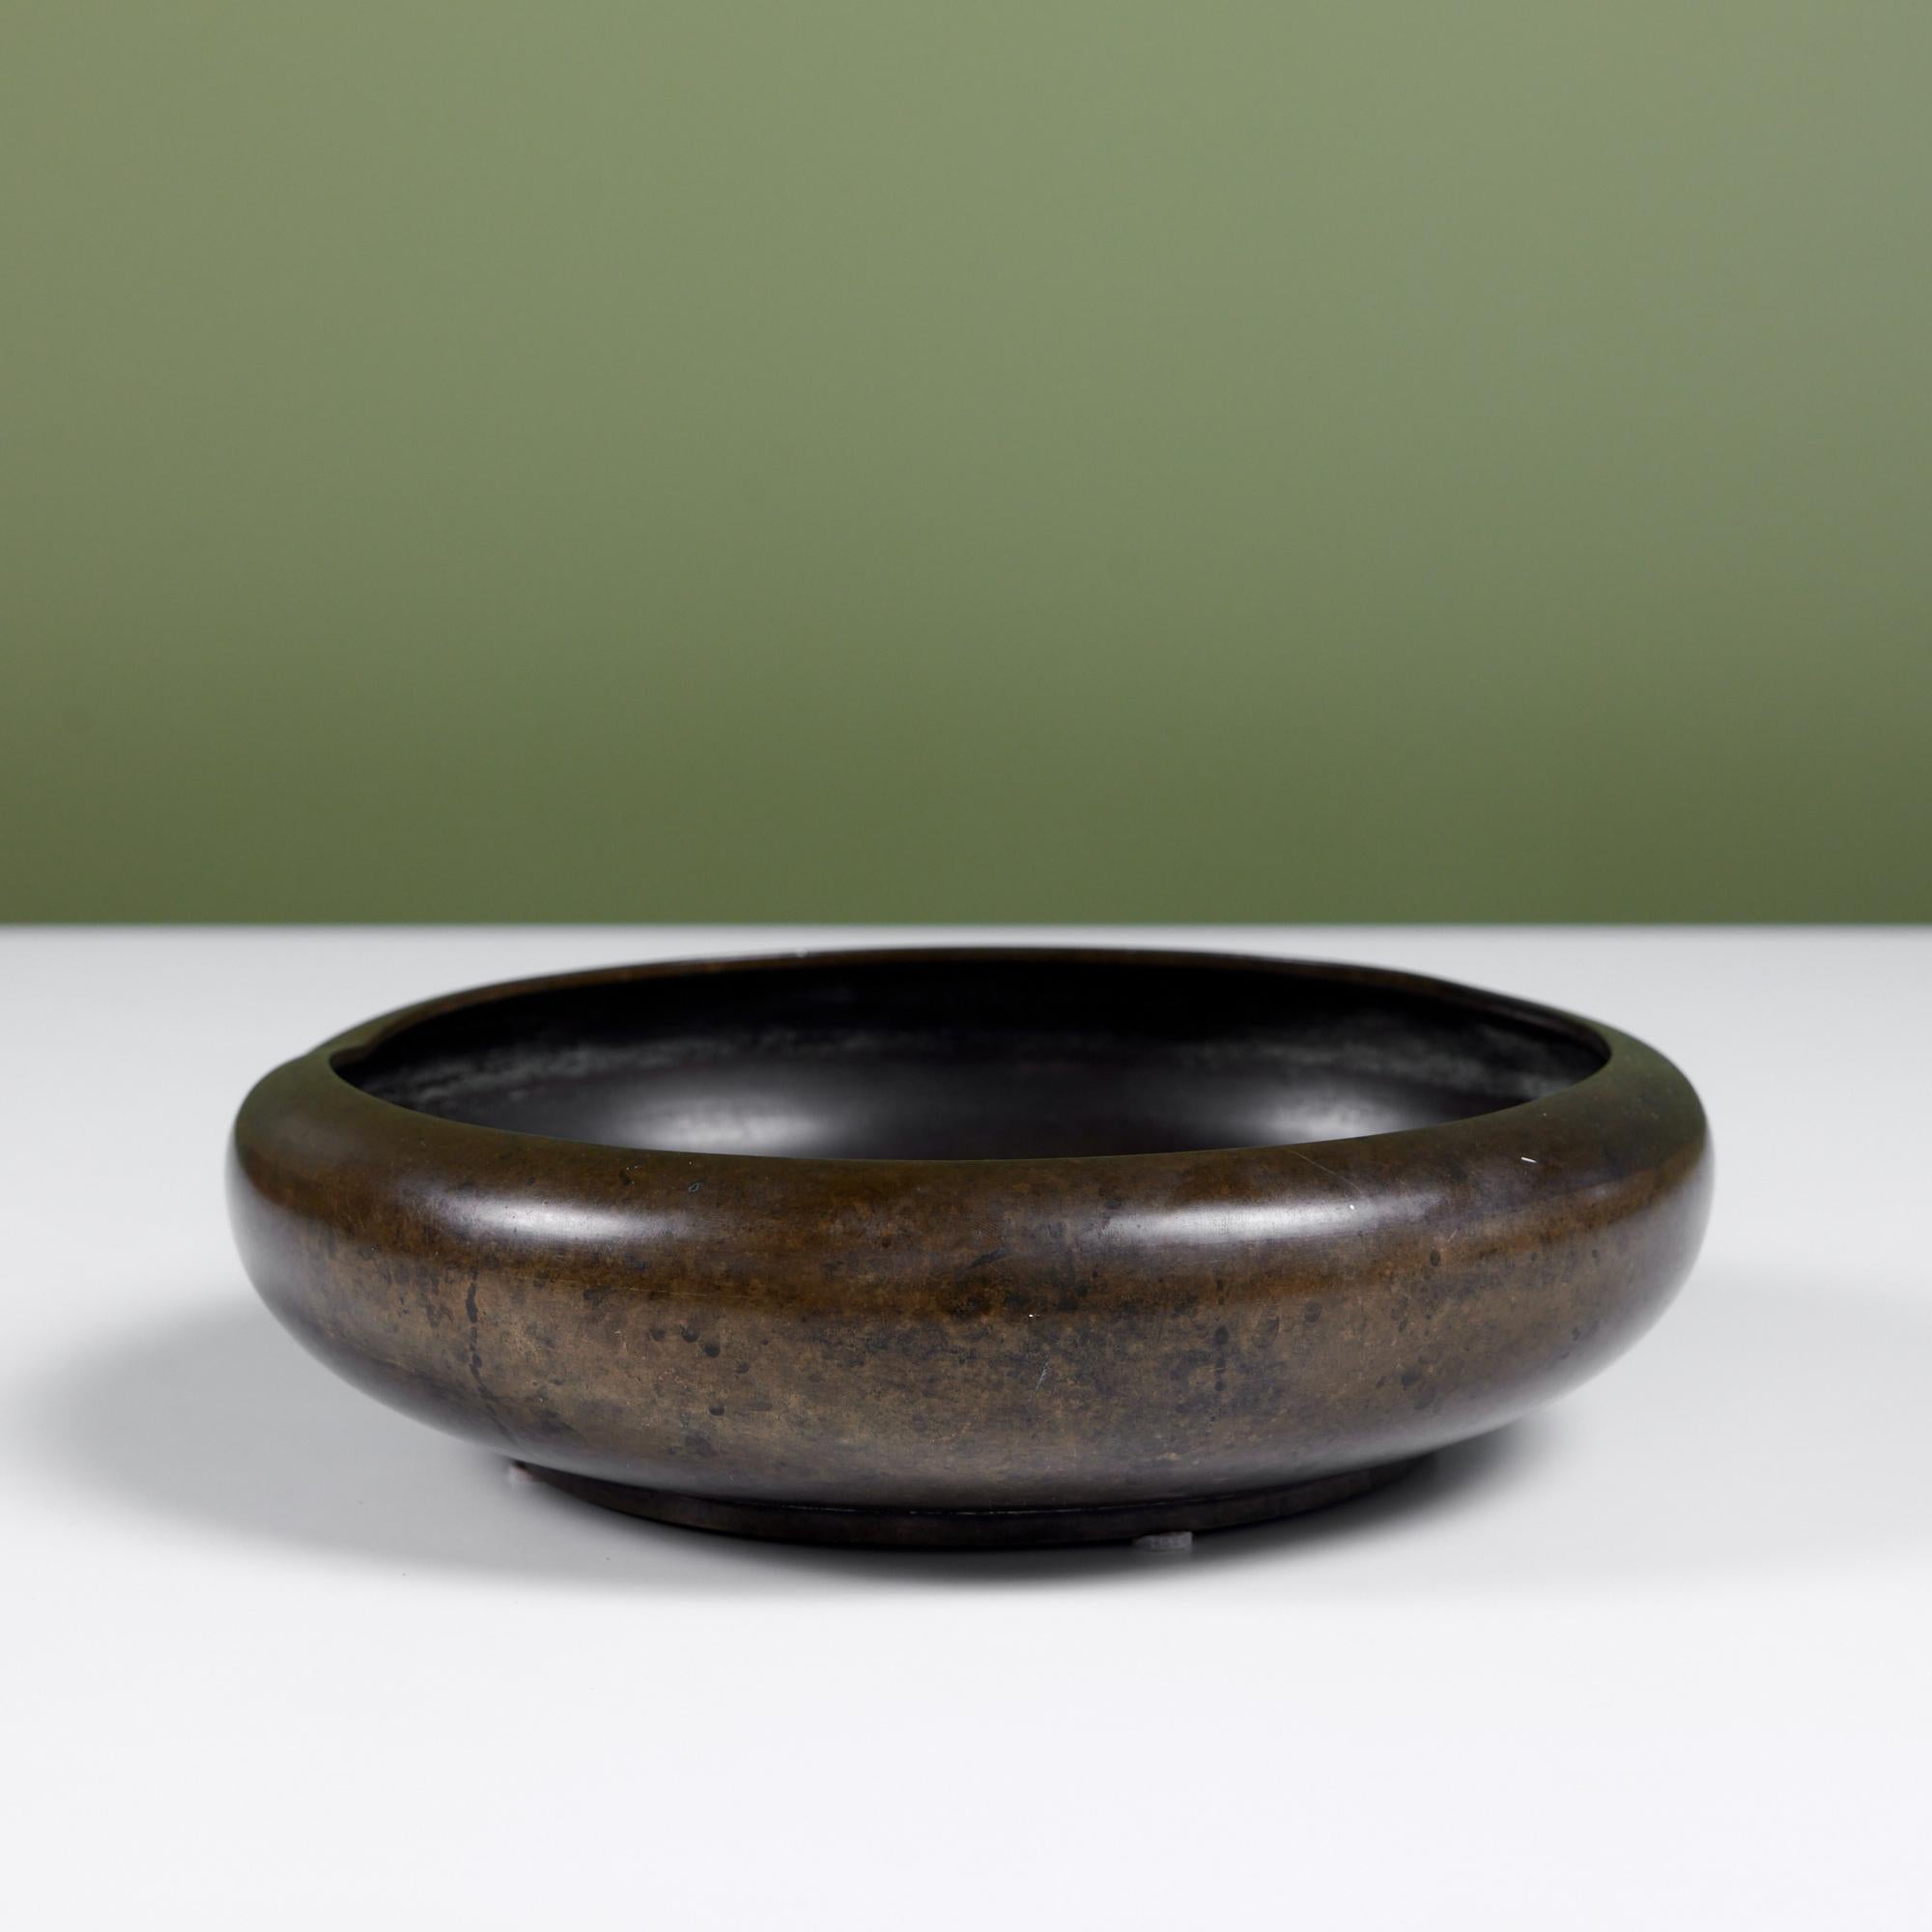 Wide patinated bronze bowl with a rounded lip and low profile. A perfect catchall for your pocket objects, or just a bold decorative piece.

Dimensions
10